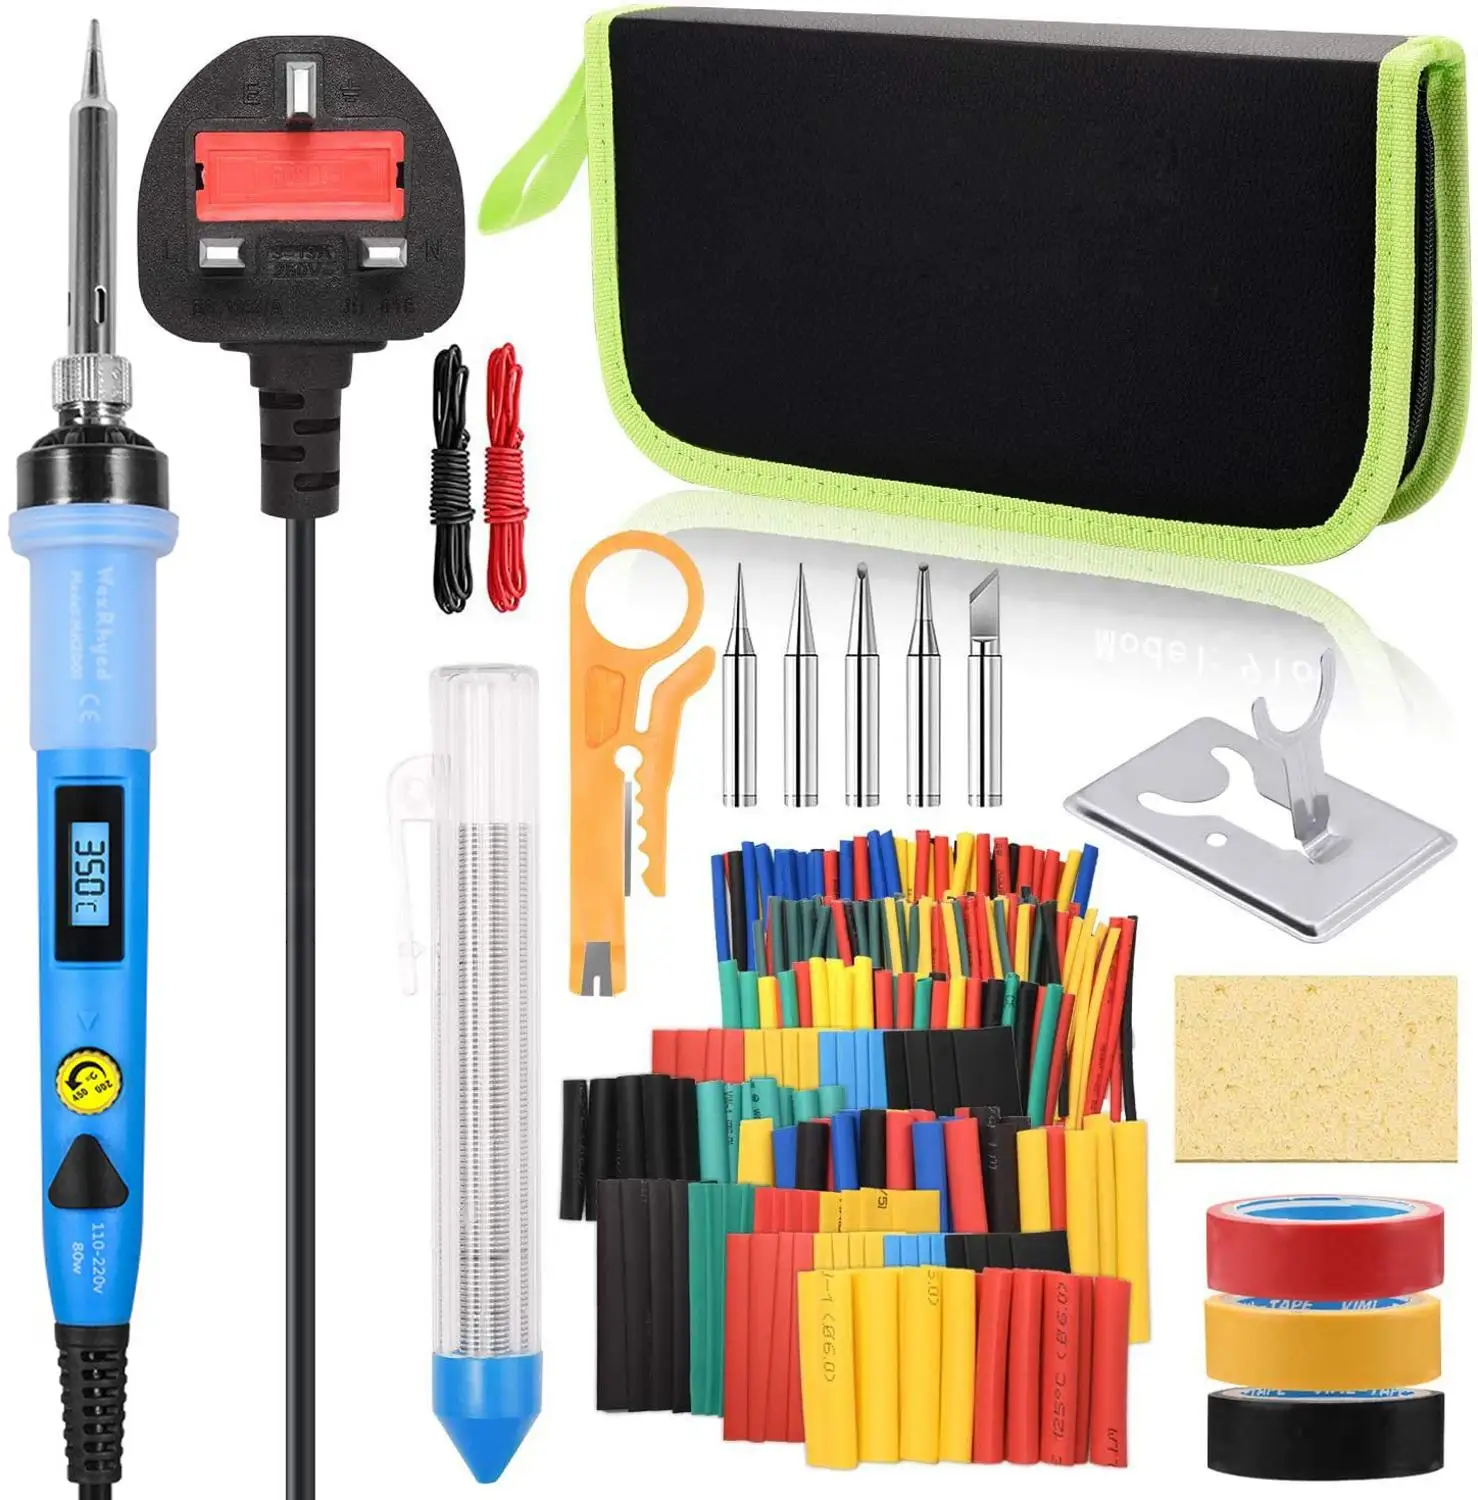 

Adjustable Temperature,60W/80W Digital Soldering Iron kit, with 328pcs Heat Shrink Tubing, Insulating Tape, Welding iron tools